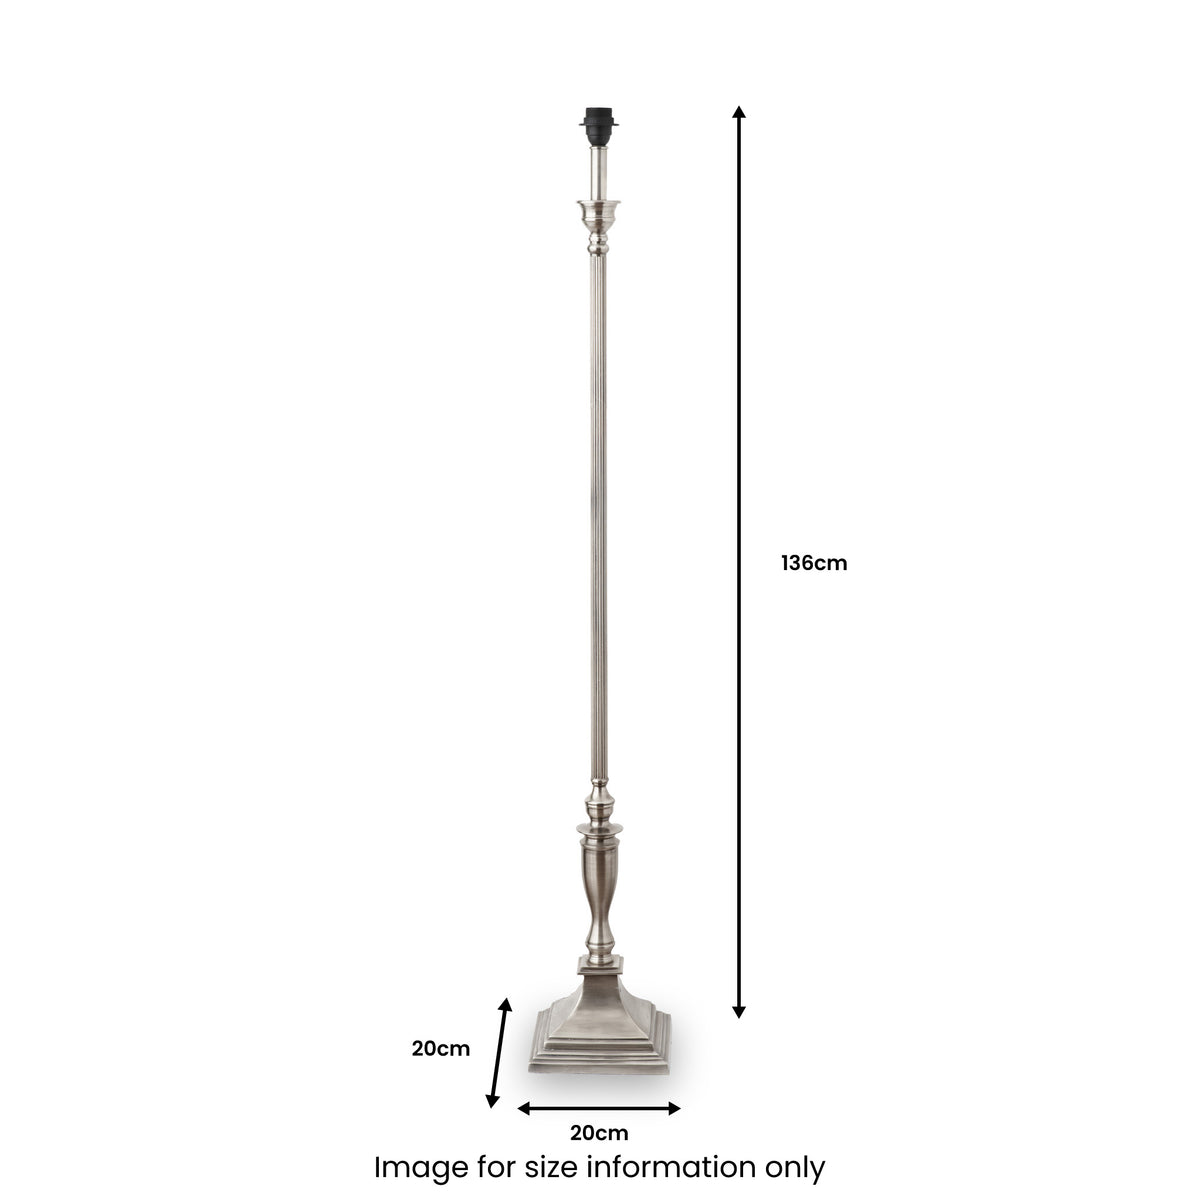 Canterbury Antique Silver Floor Lamp from Roseland Furniture